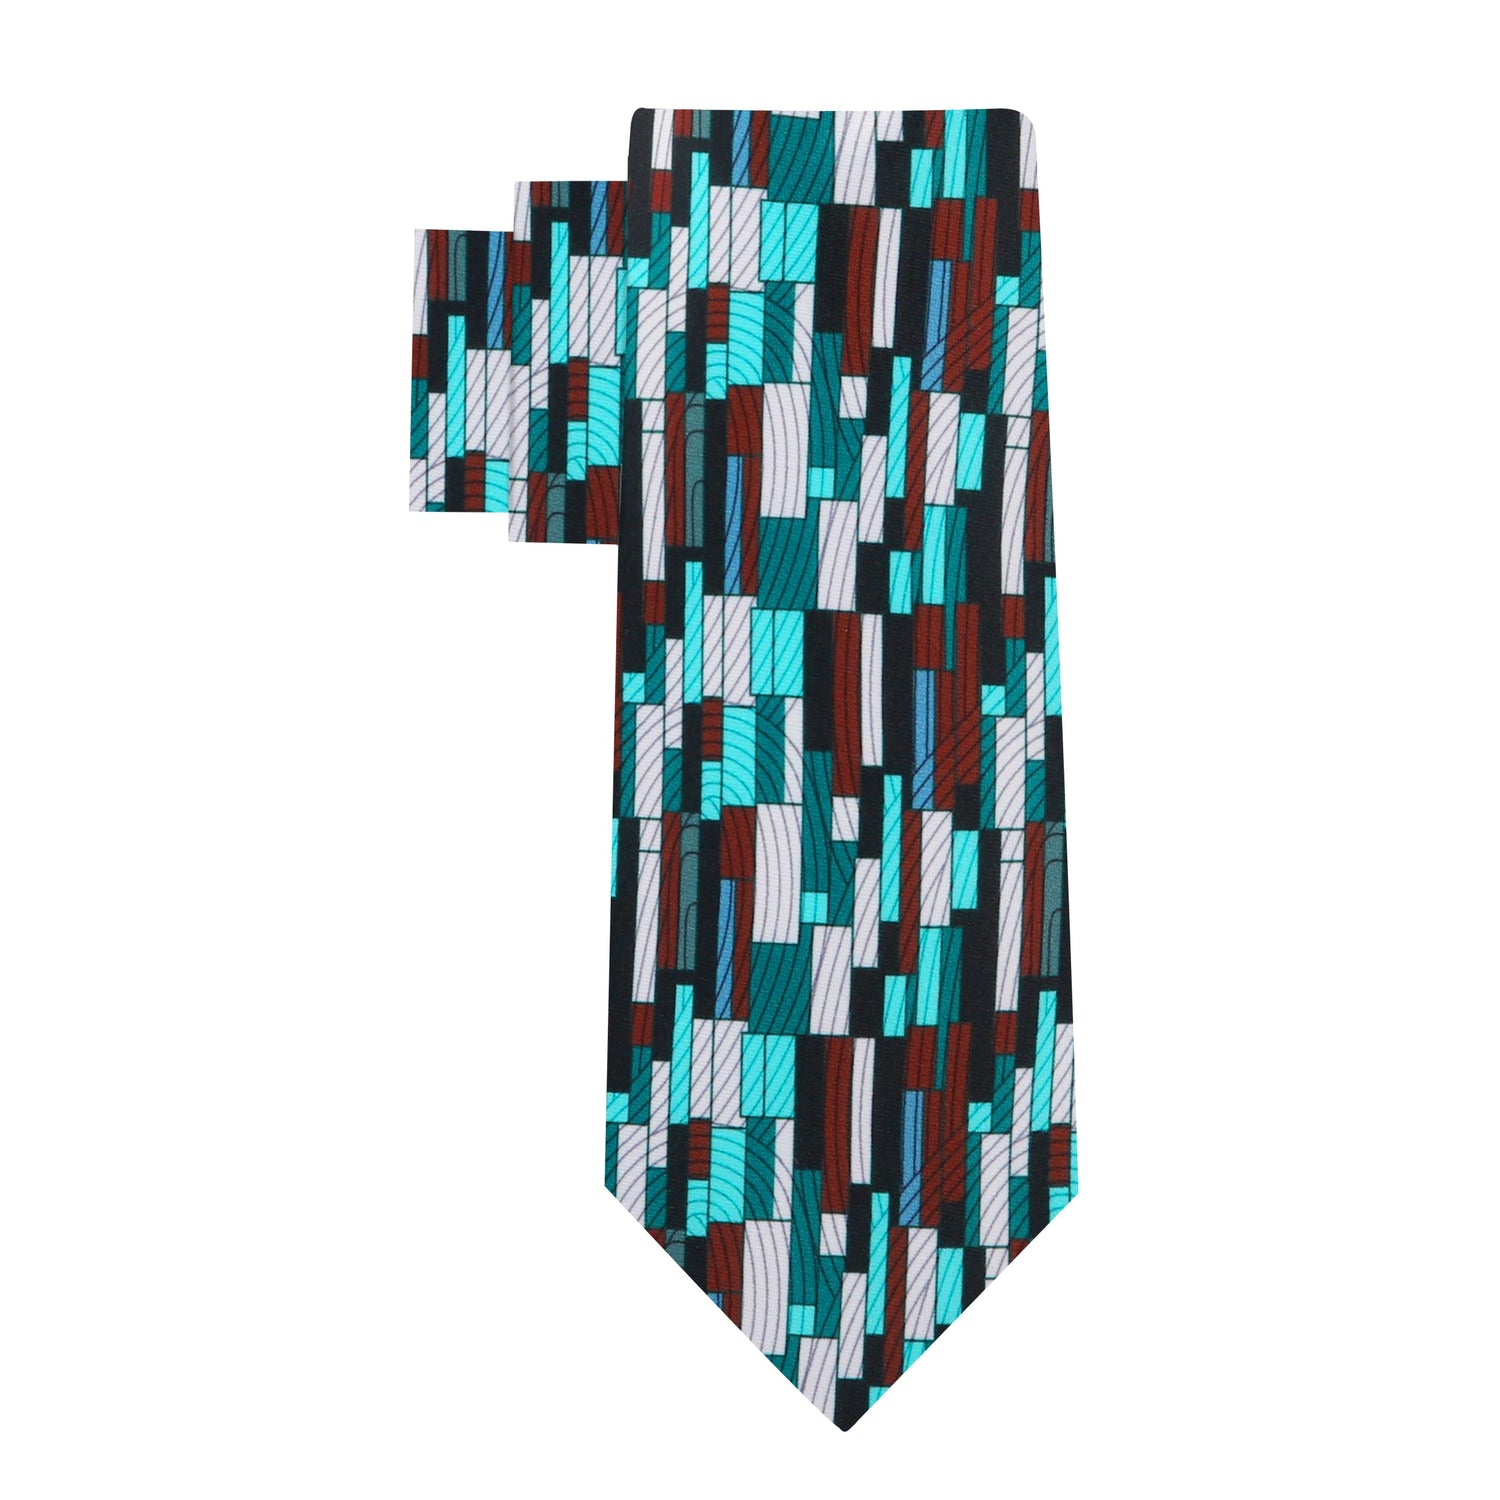 Alt View: Light Blue, White, Deep Red Abstract Tie